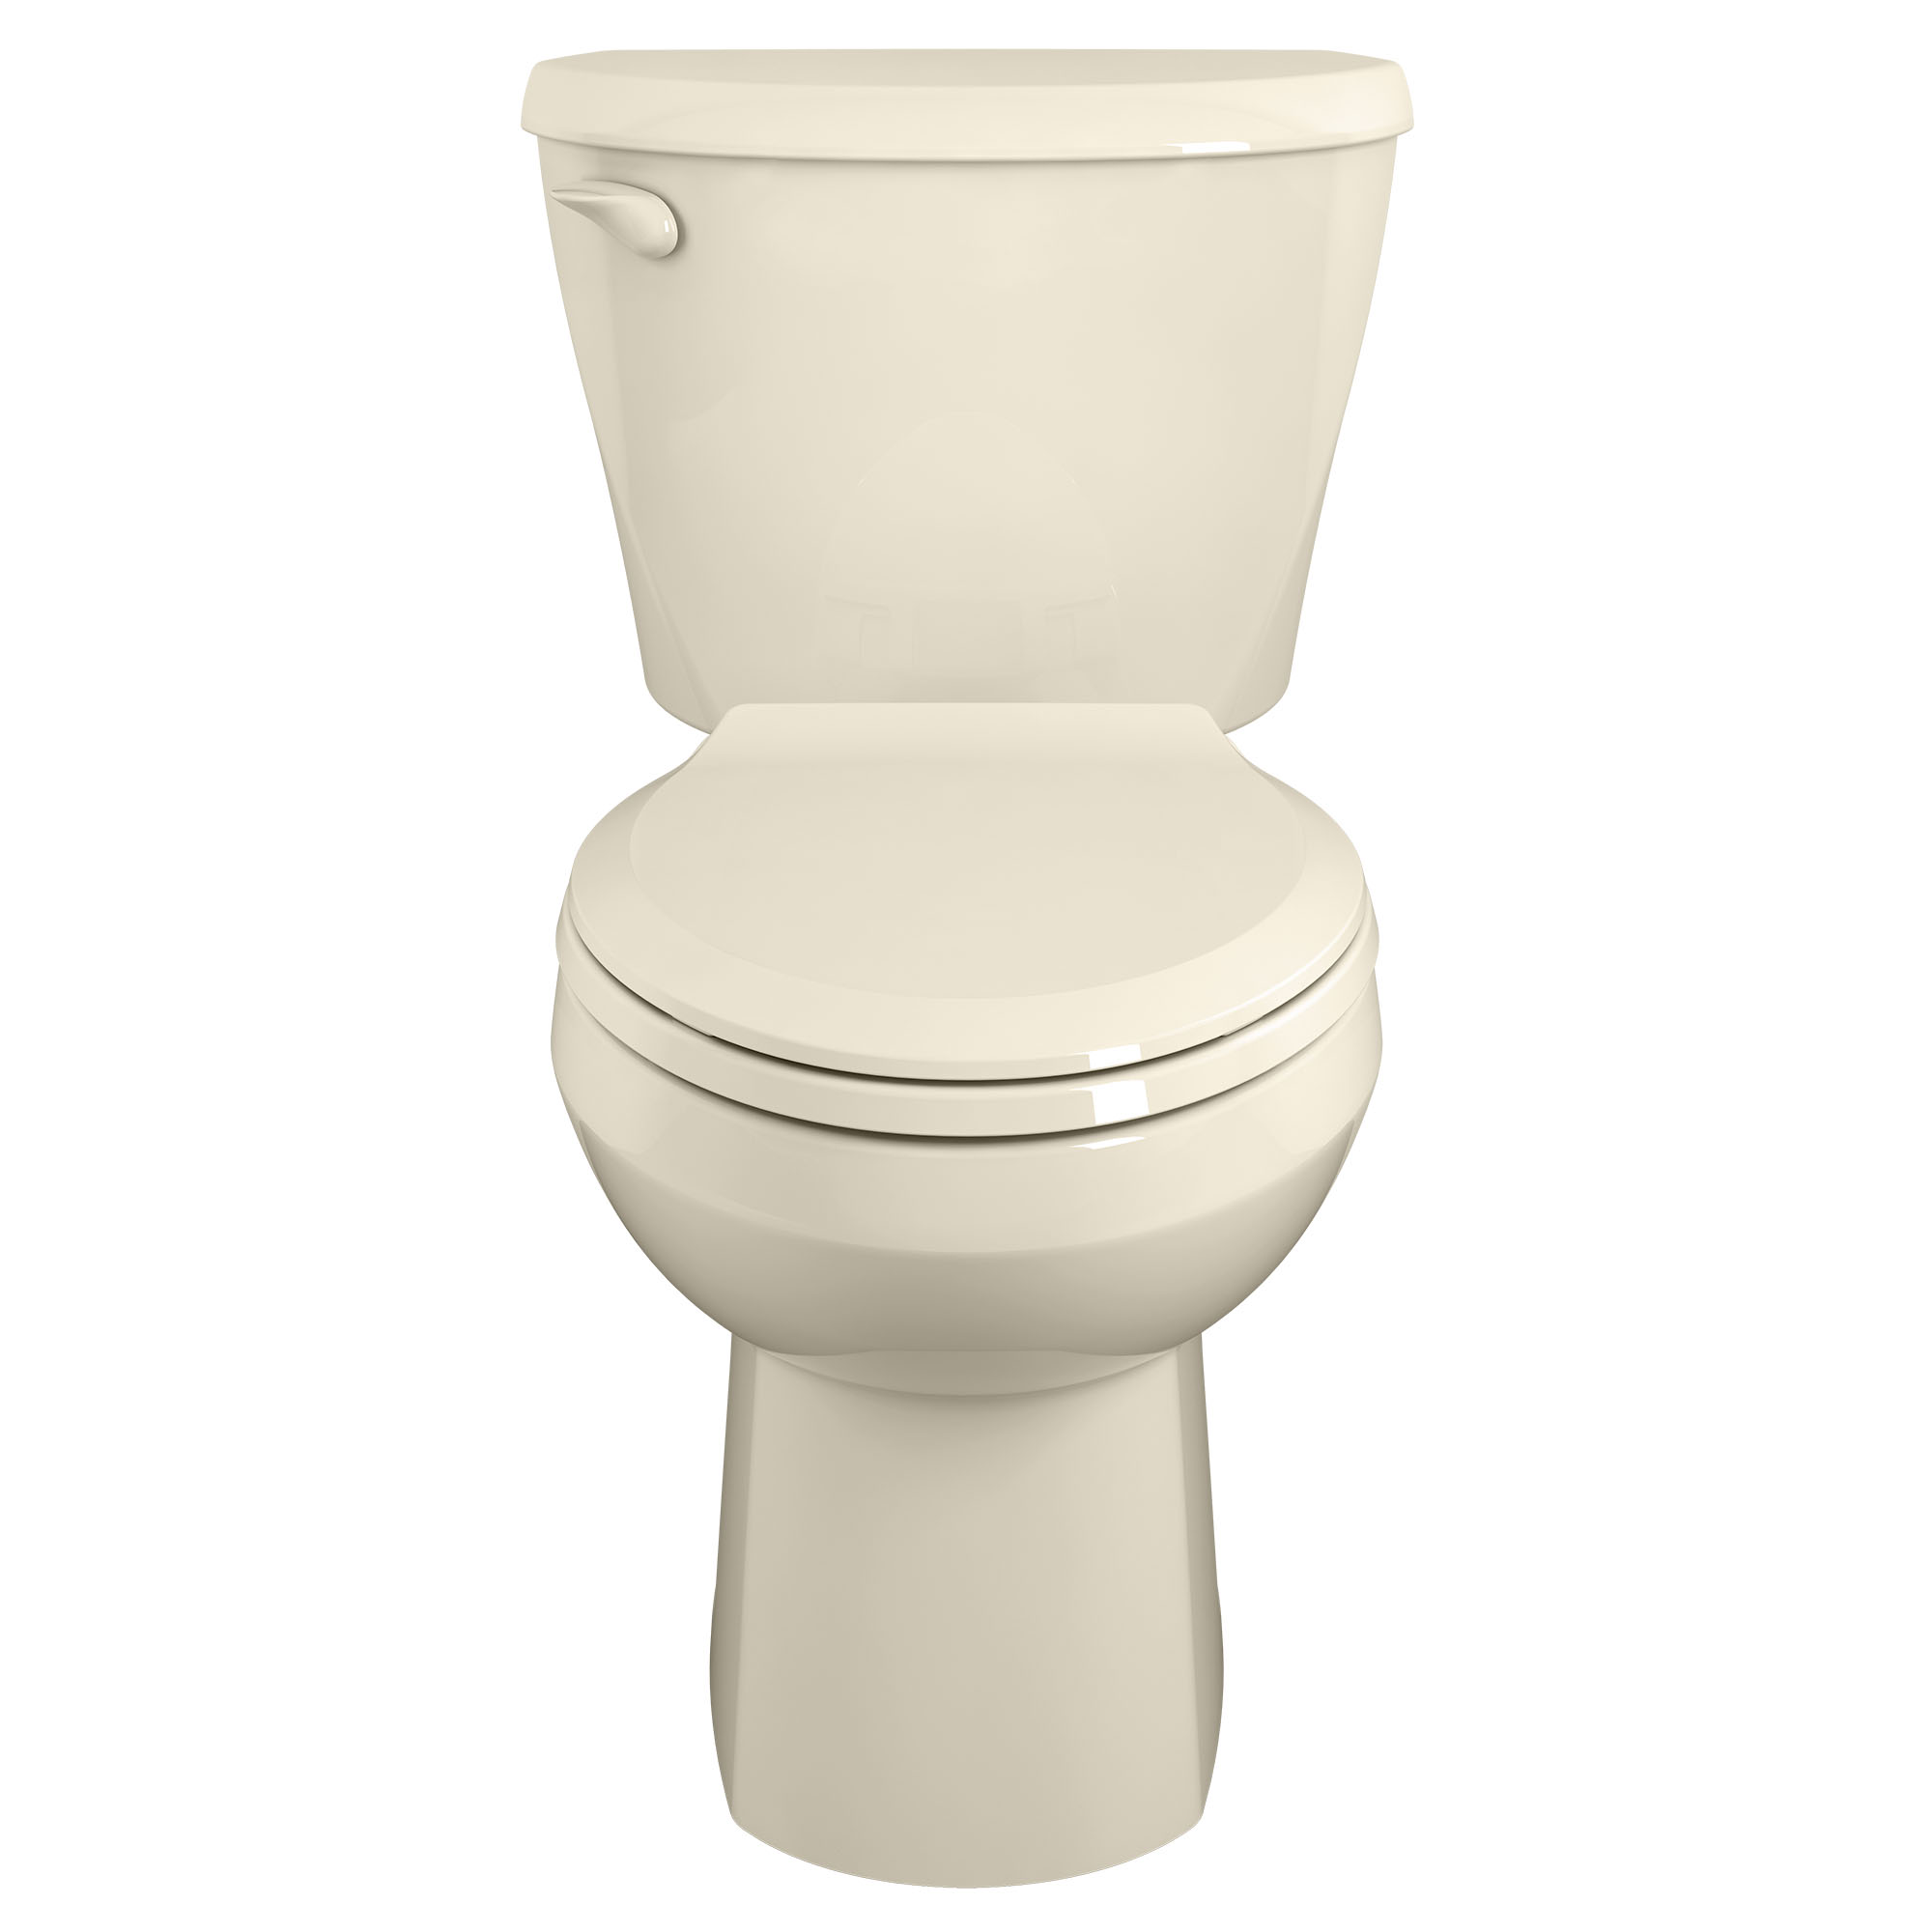 Colony® Two-Piece 1.28 gpf/4.8 Lpf Standard Height Elongated Toilet Less Seat